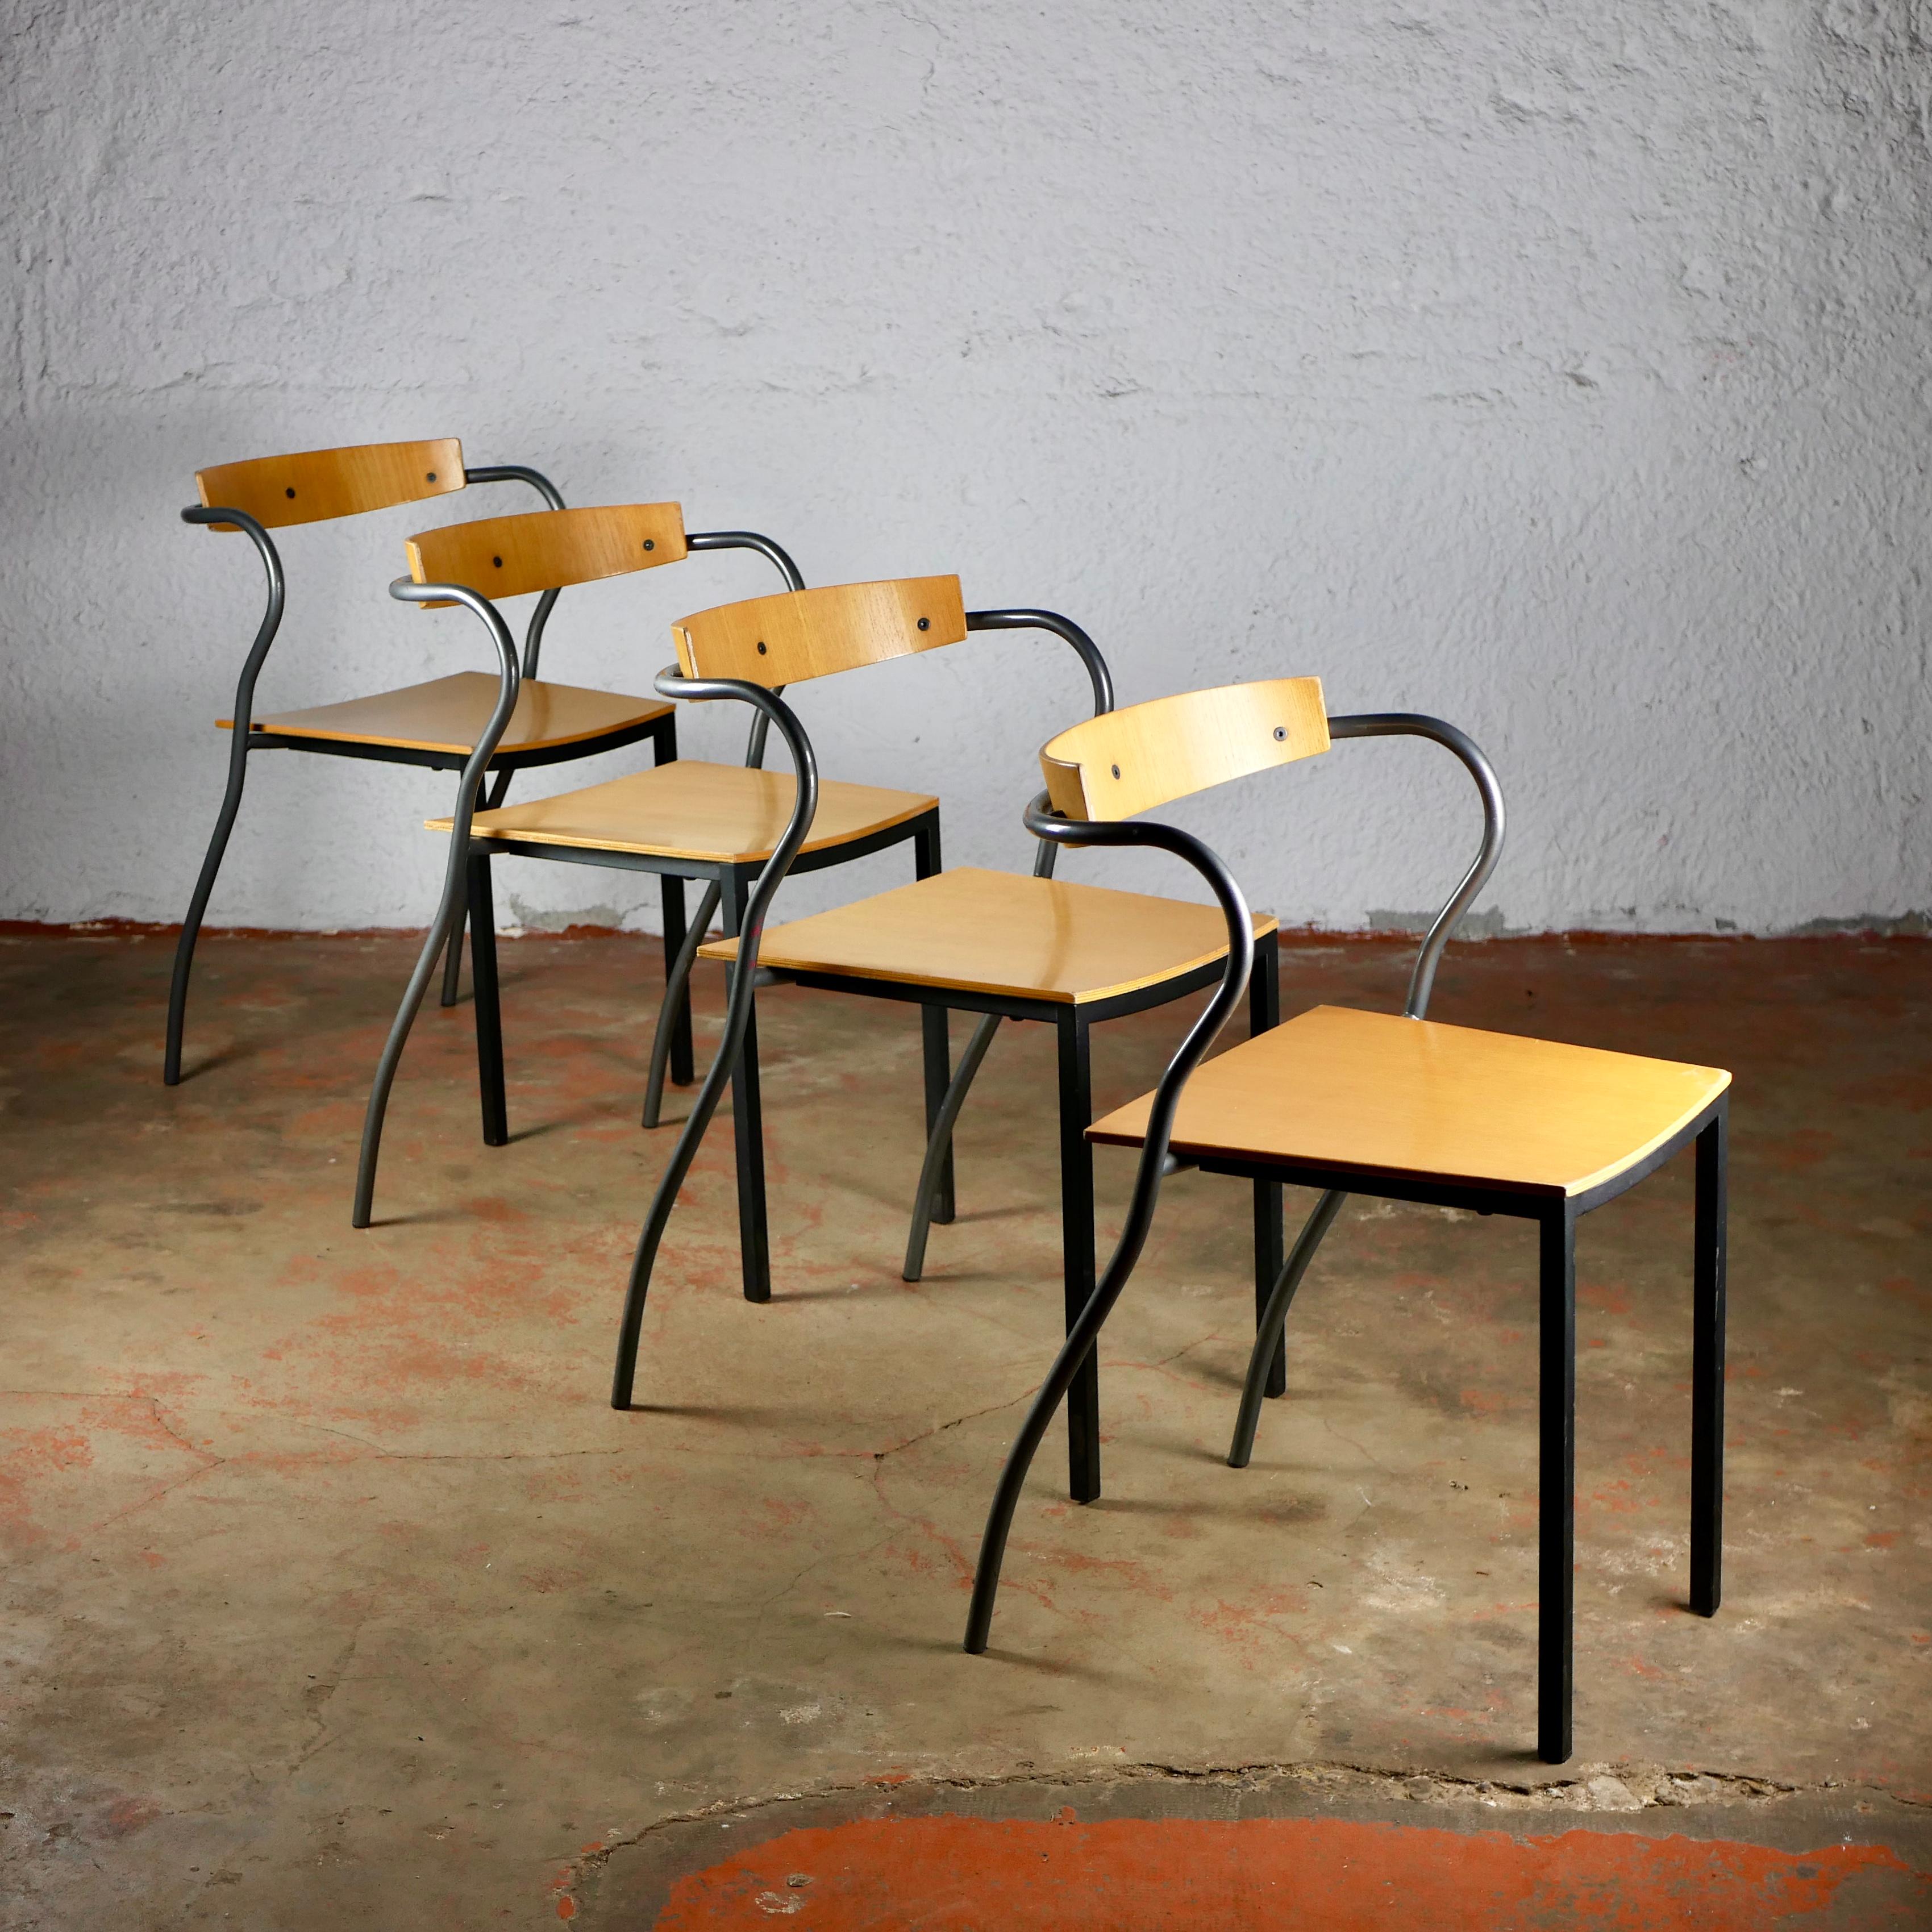 A playful design, convenient and not without remembering the designs of the Memphis Group in the 1980s.
Set of 4 chairs, 